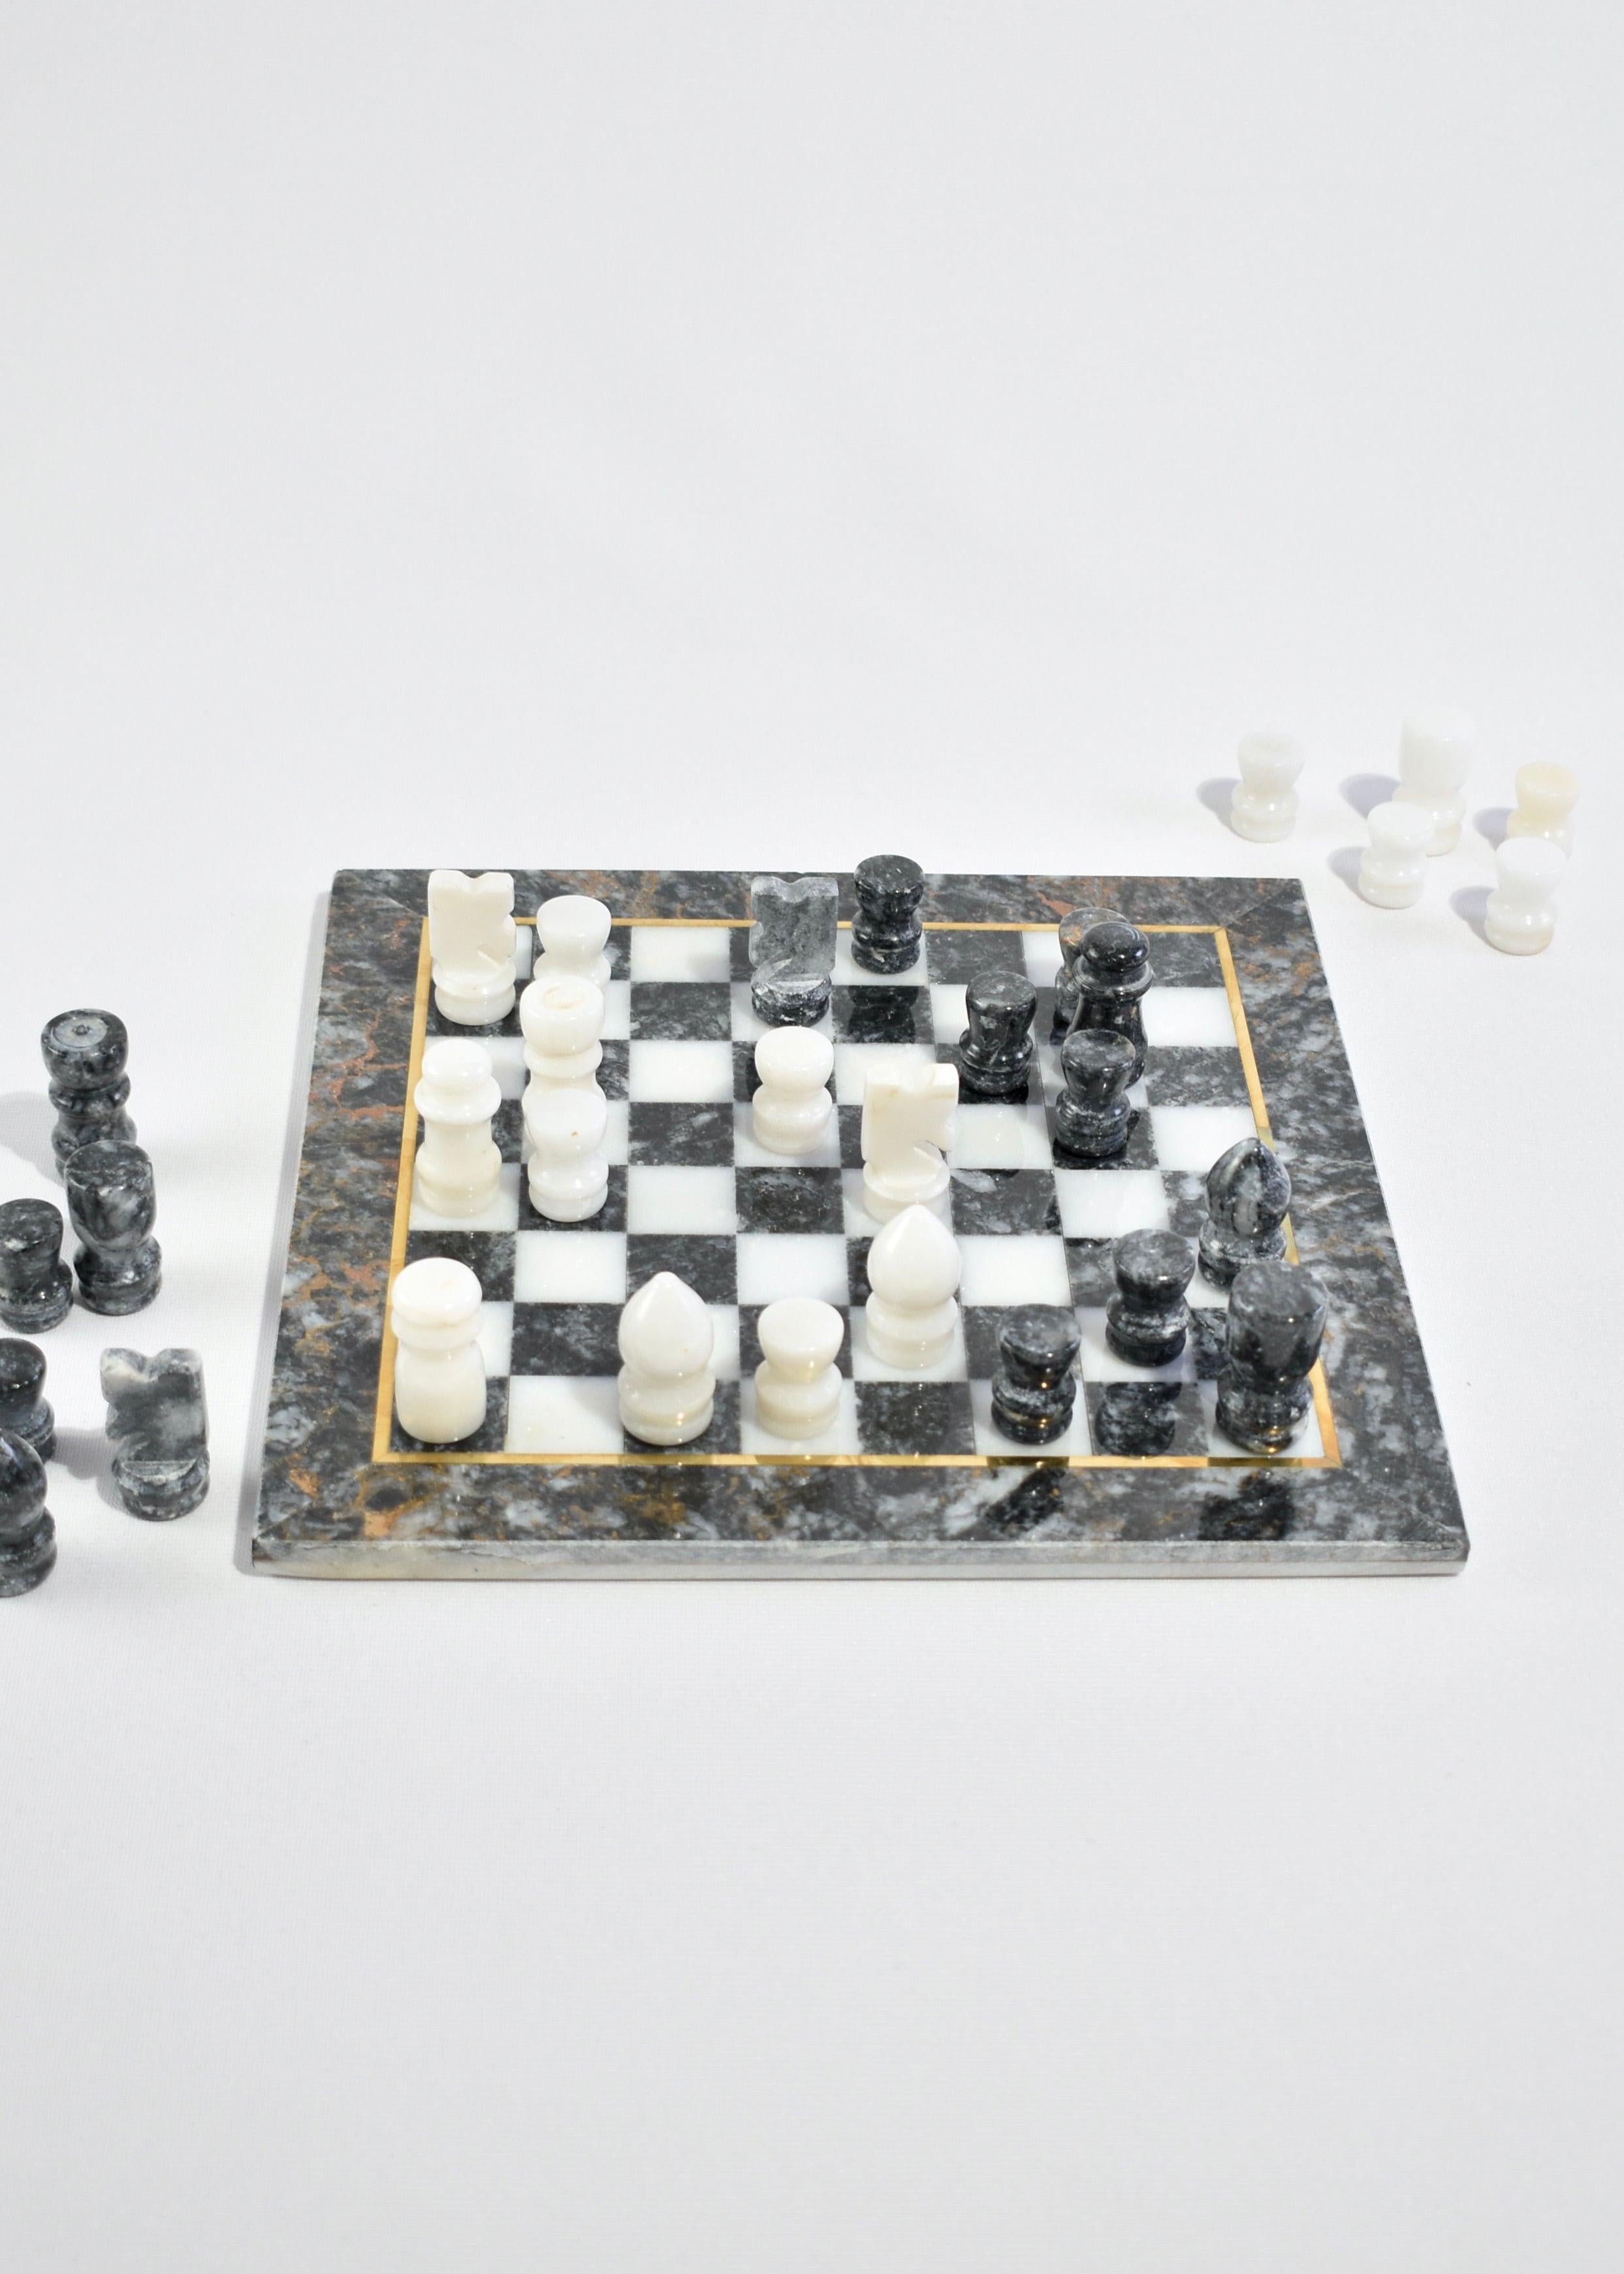 Marble chess board with brass inlay and hand carved pieces in gray and white. Includes 32 chess pieces and board.